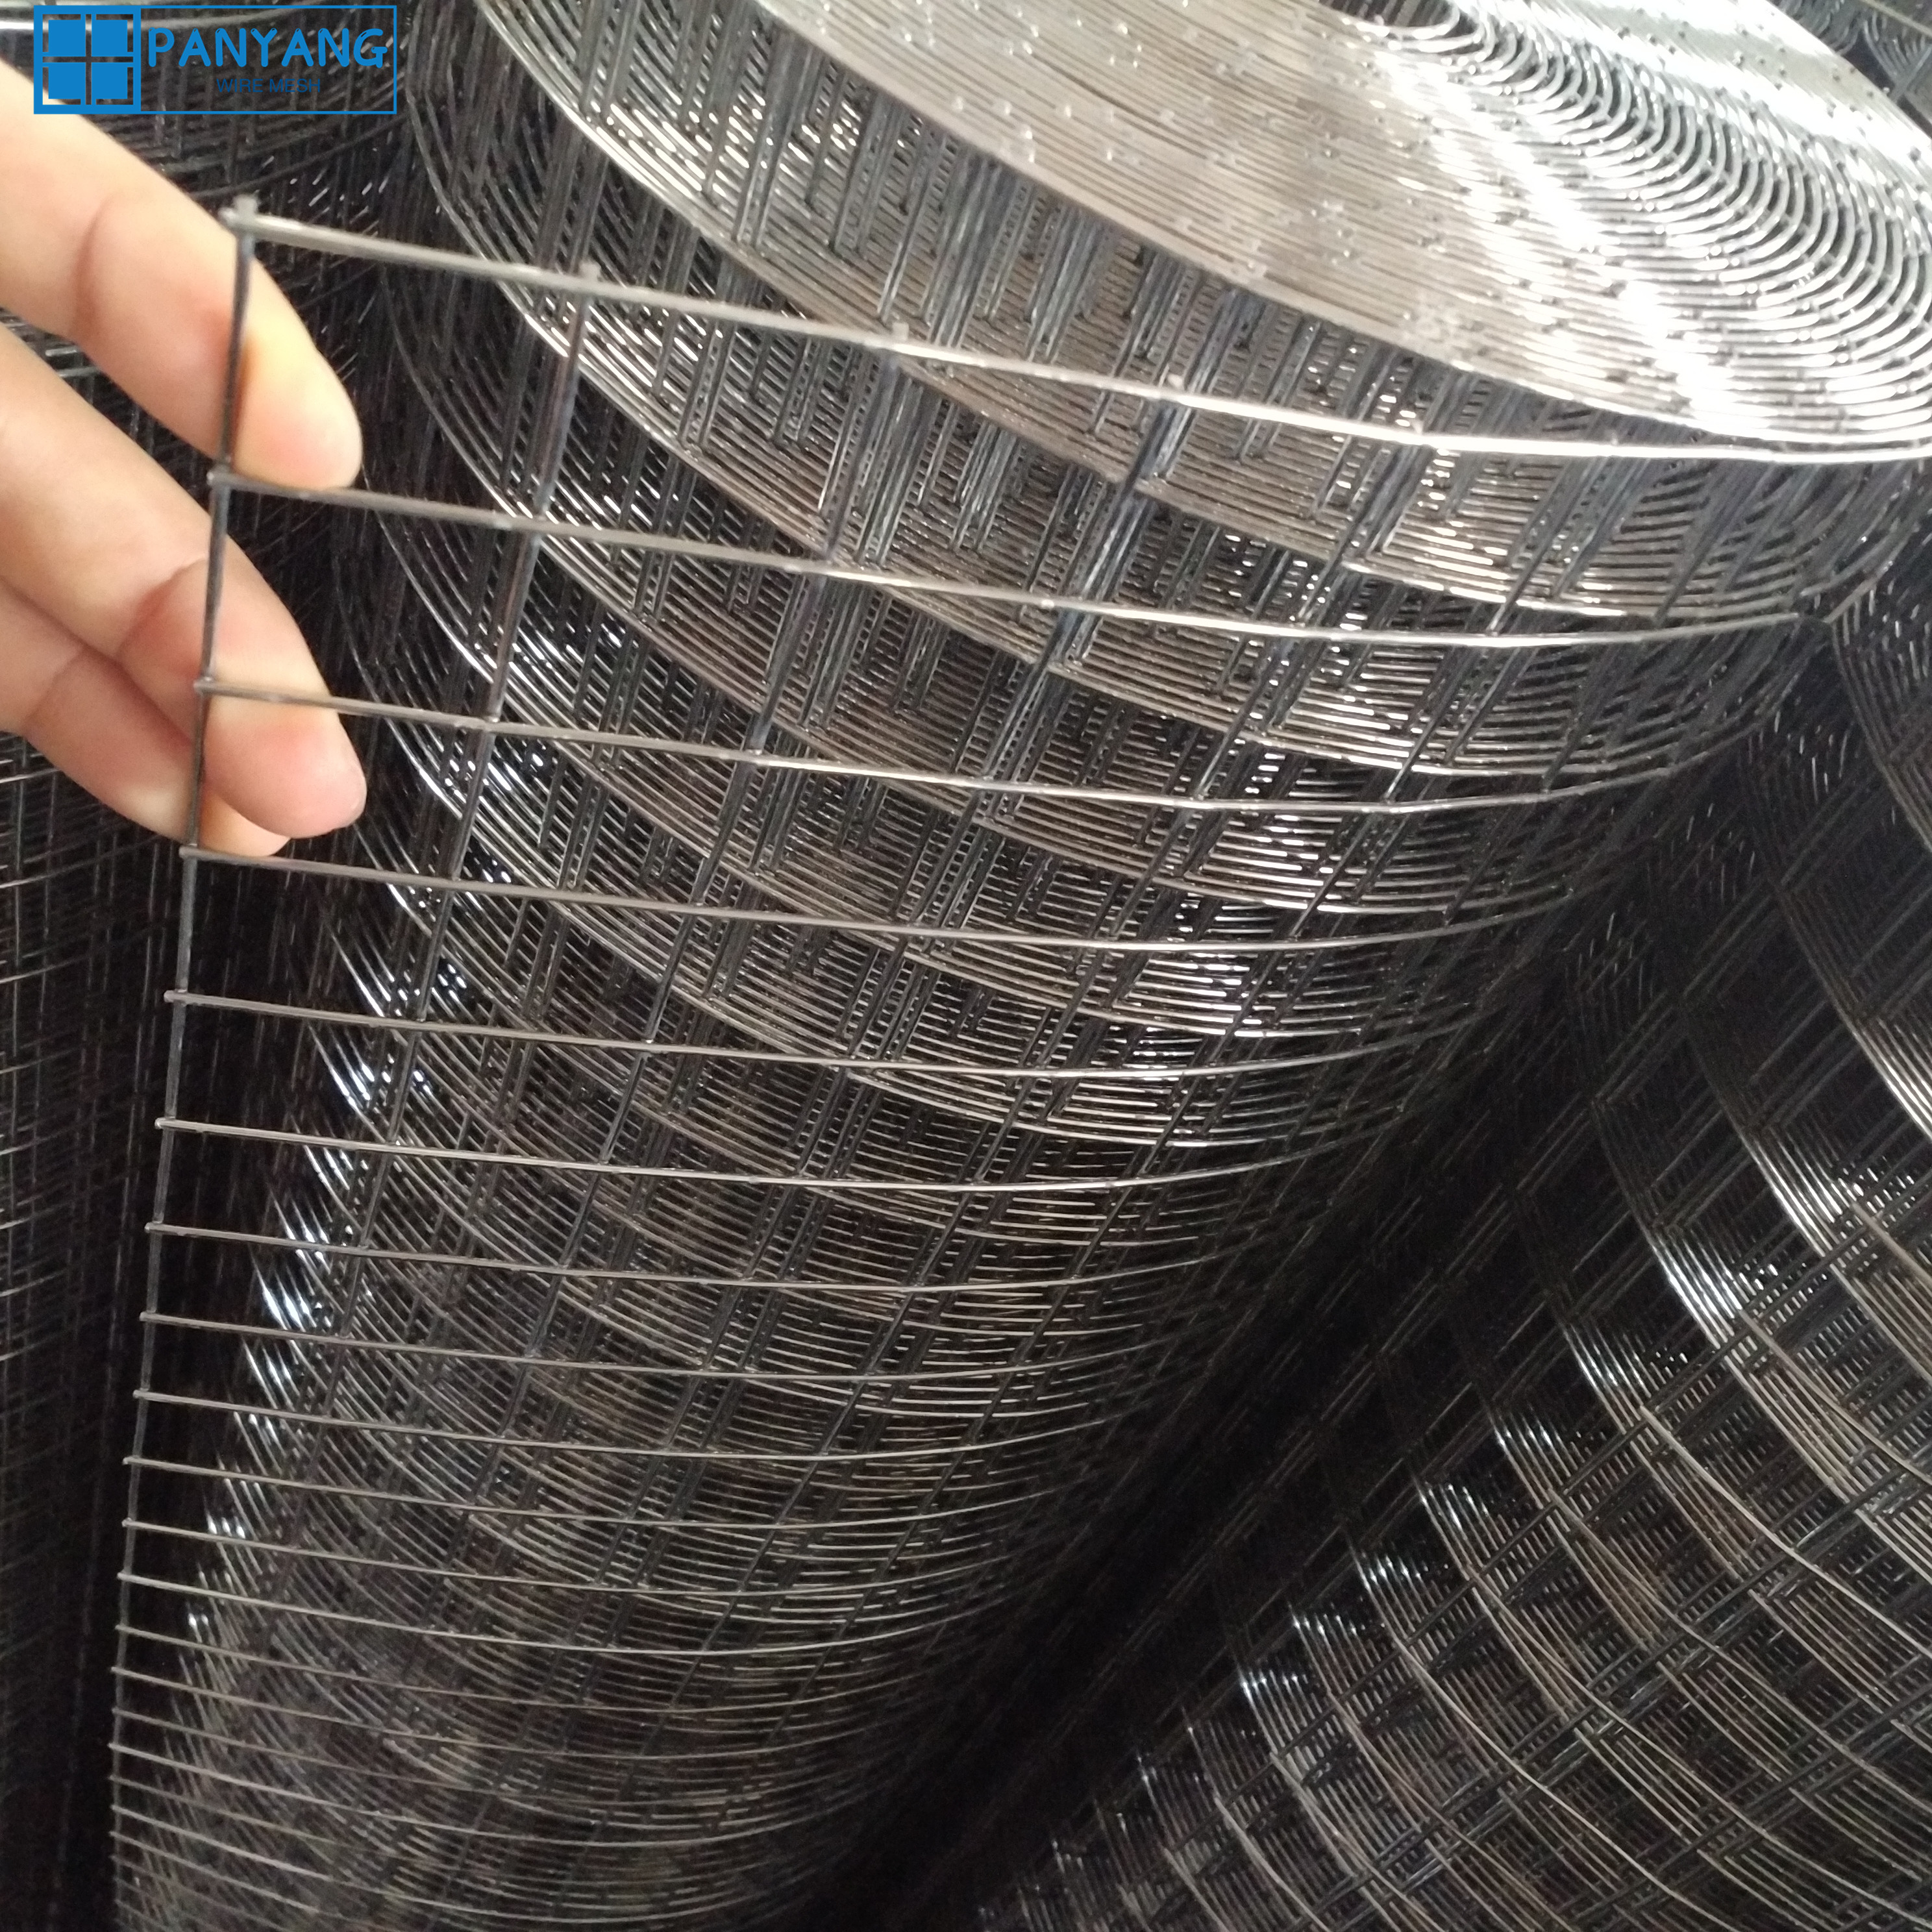 Best Playground Pvc Coated Steel Welded Wire Mesh Manufacturer and Factory